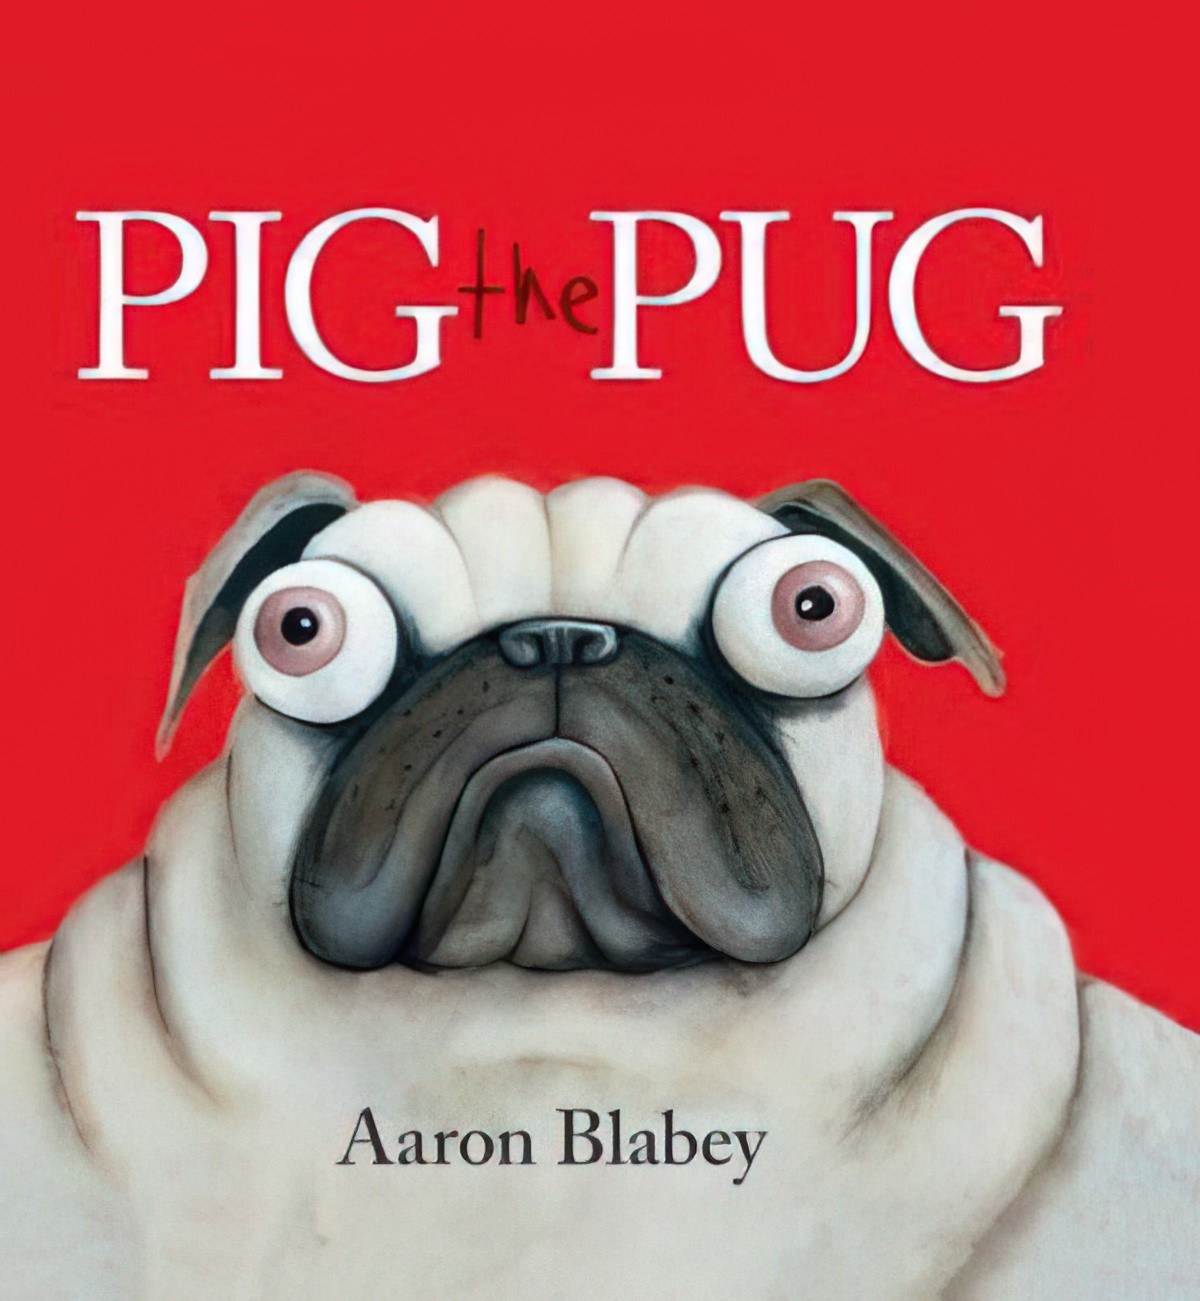 Pig The Pug by Aaron Blabey Picture Book Analysis